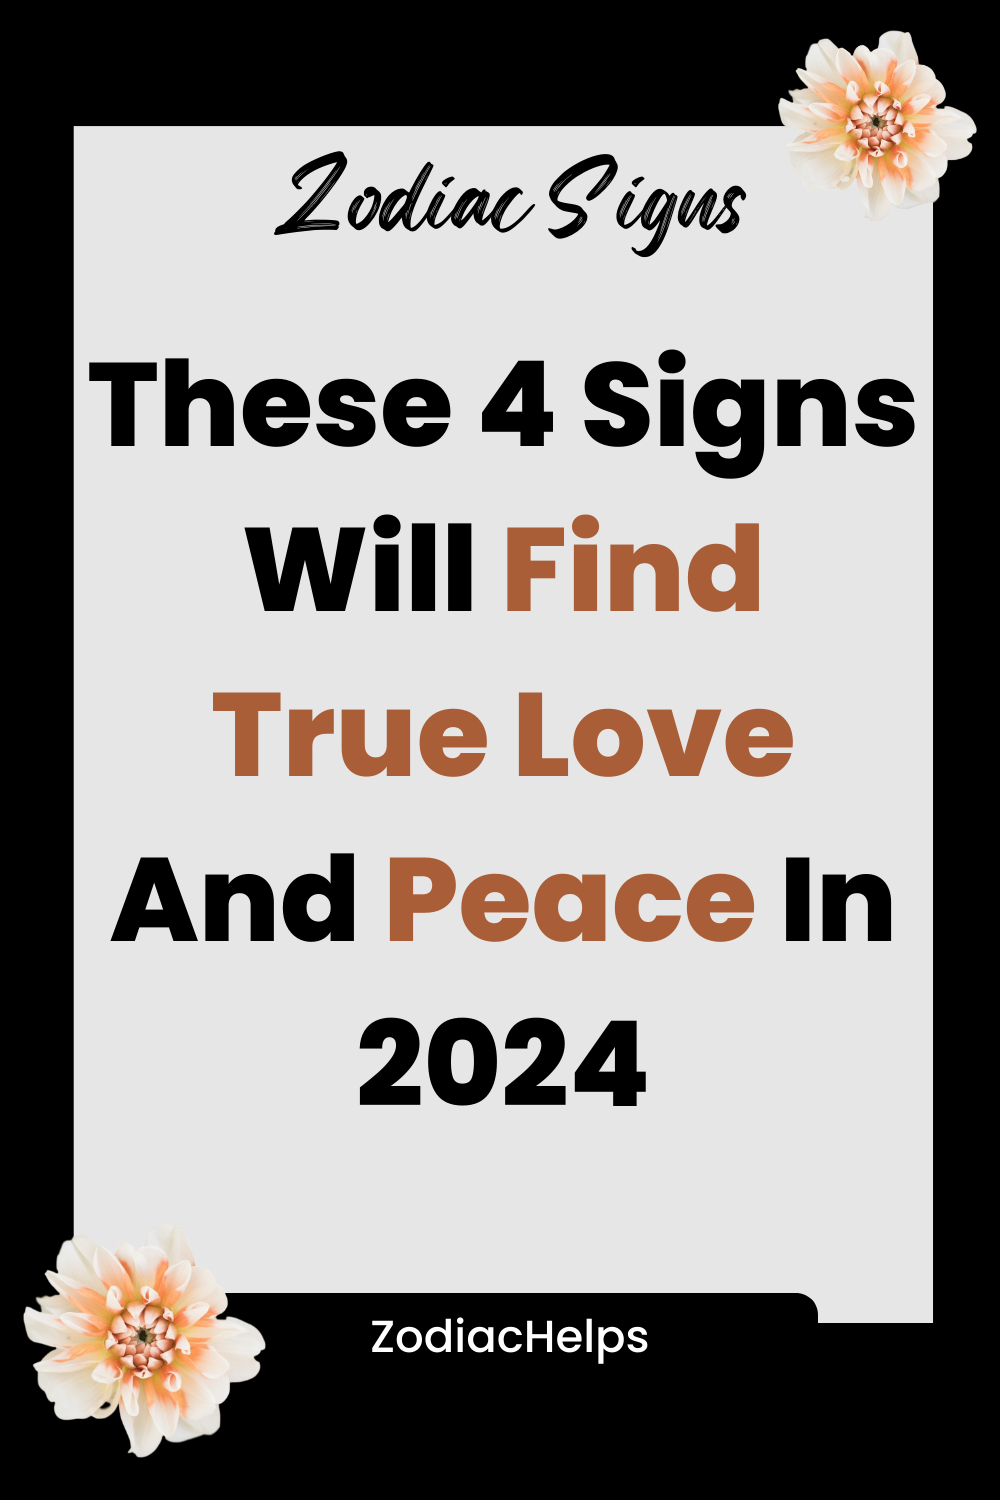 These 4 Signs Will Find True Love And Peace In 2024